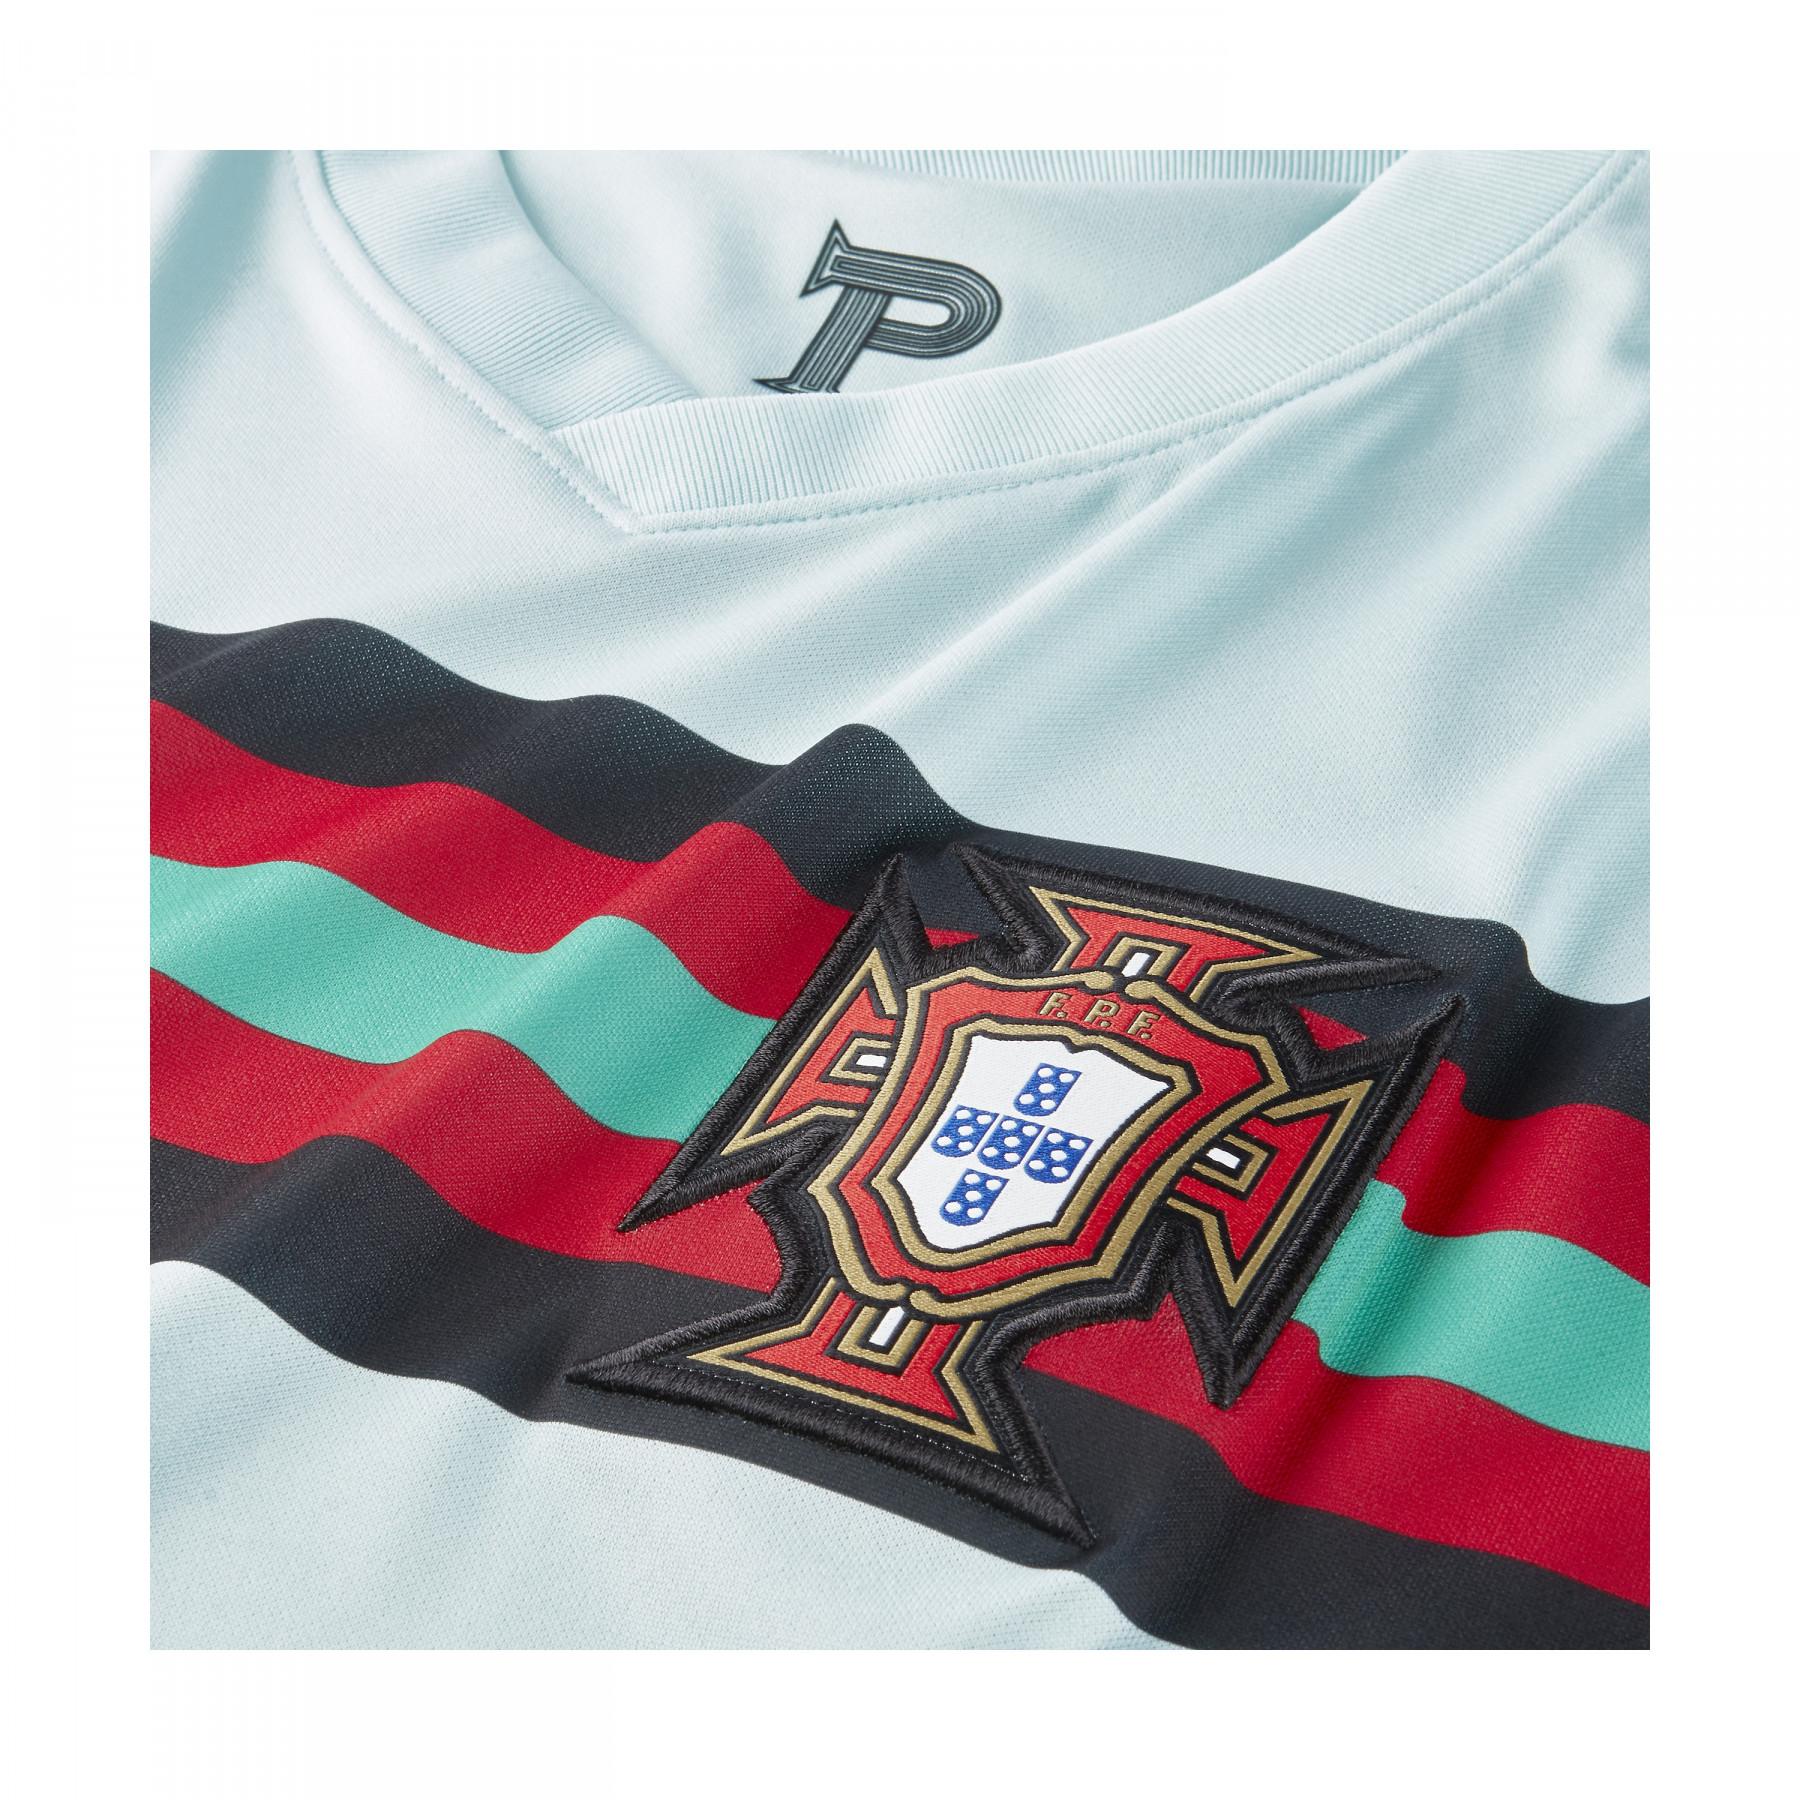 Outdoor jersey Portugal 2020